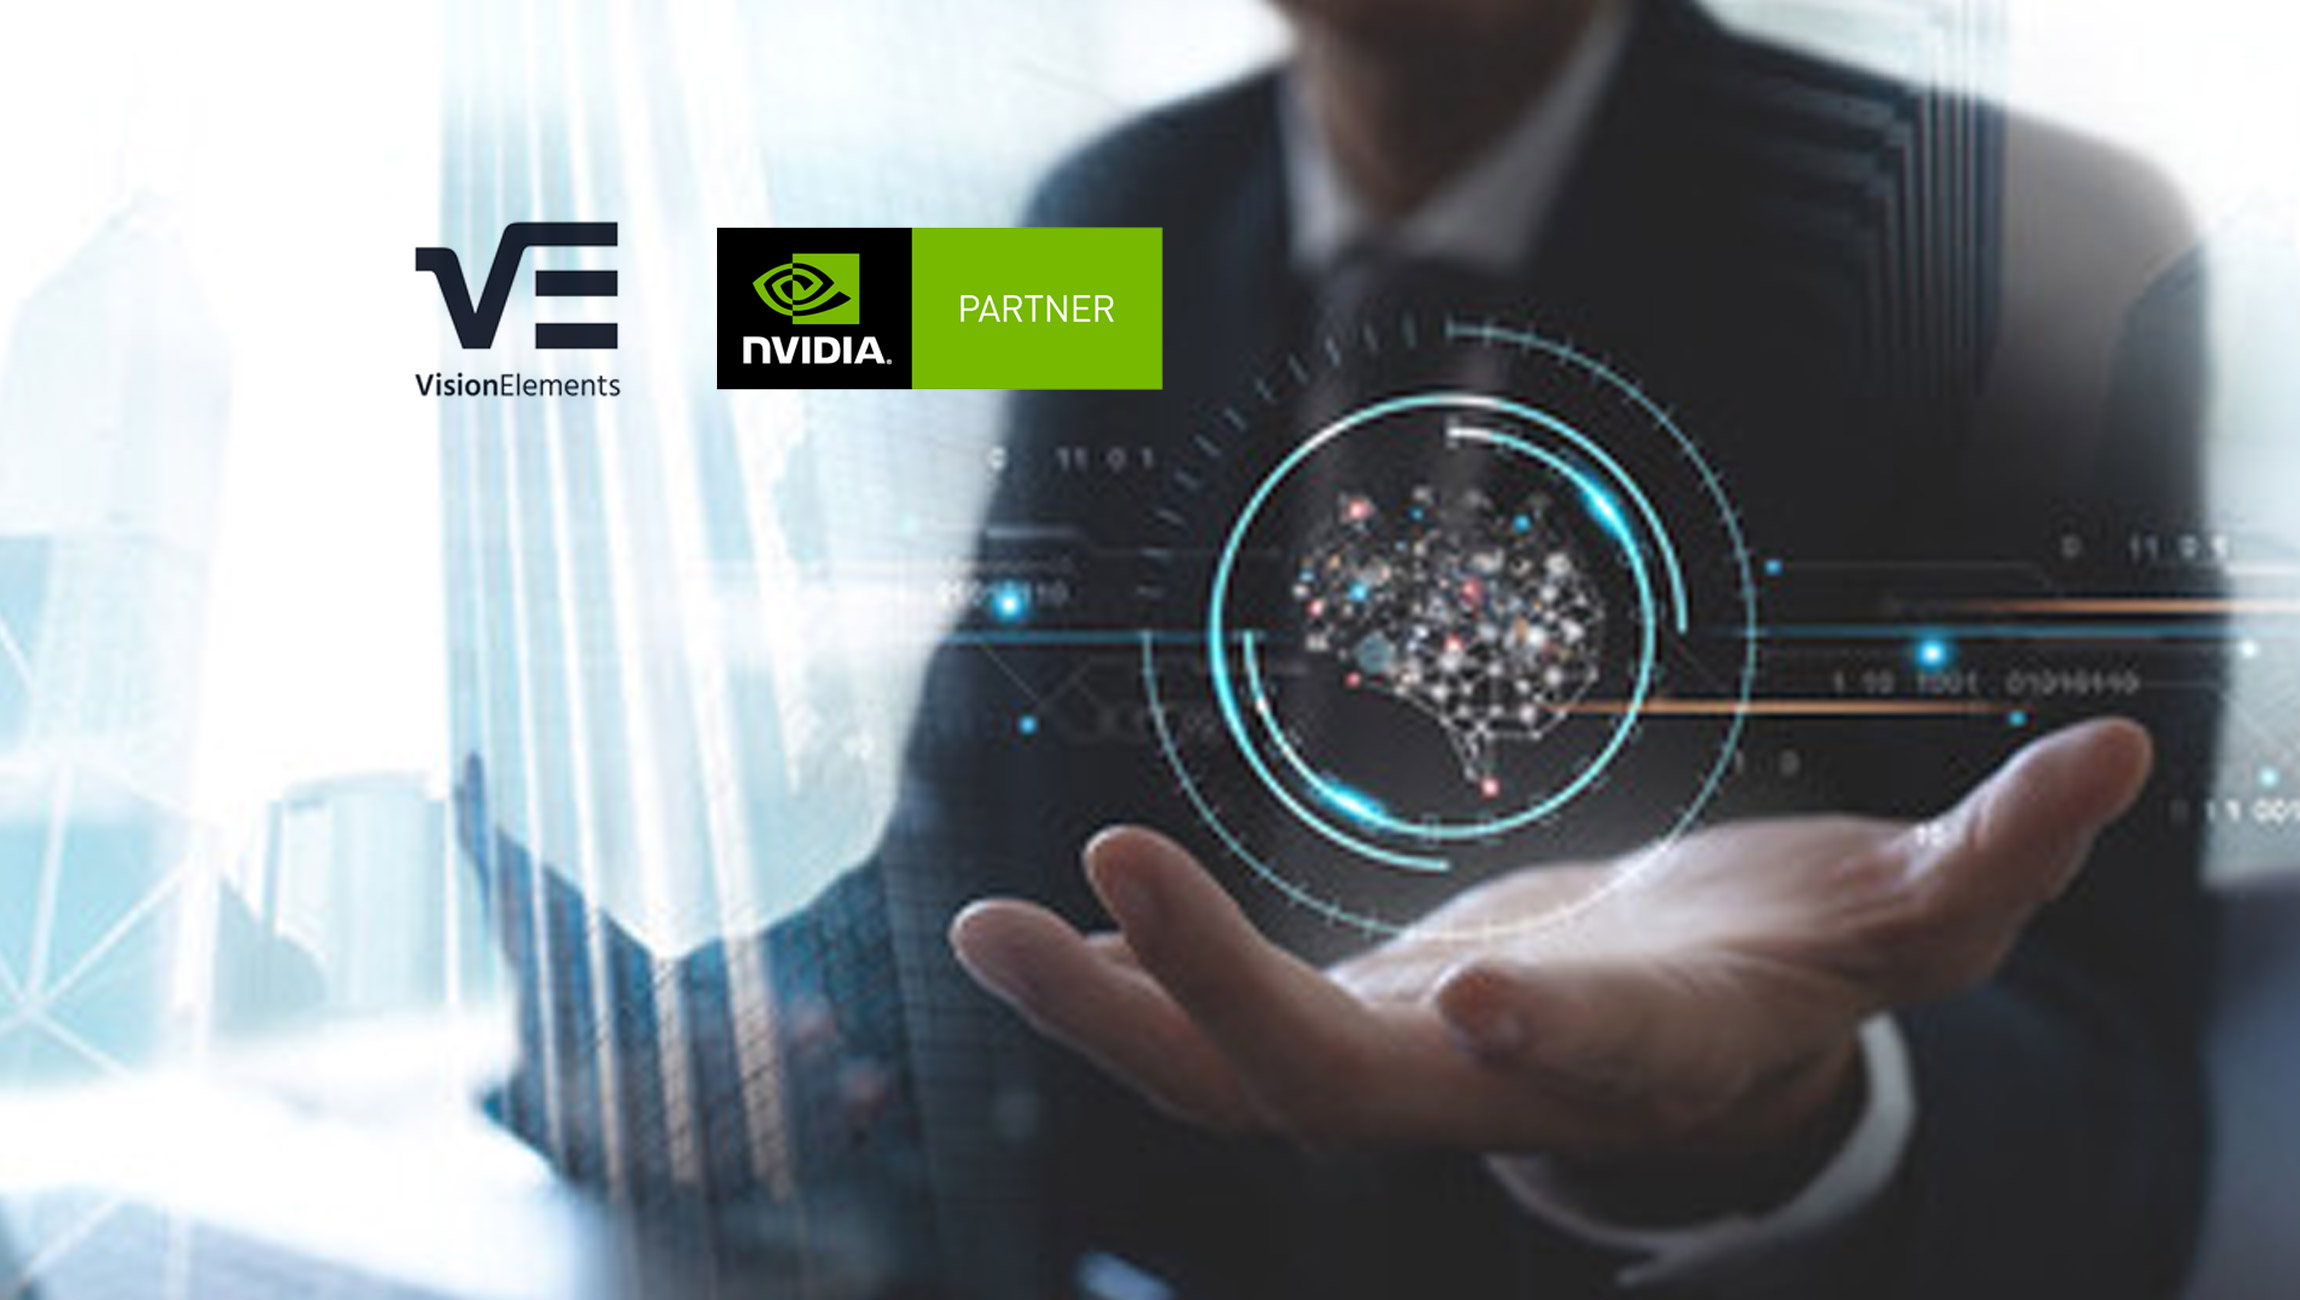 Vision-Elements-Joins-NVIDIA-Metropolis-Partner-Program_-to-Provide-State-of-the-Art-Development-Services-for-Vision-AI-Applications